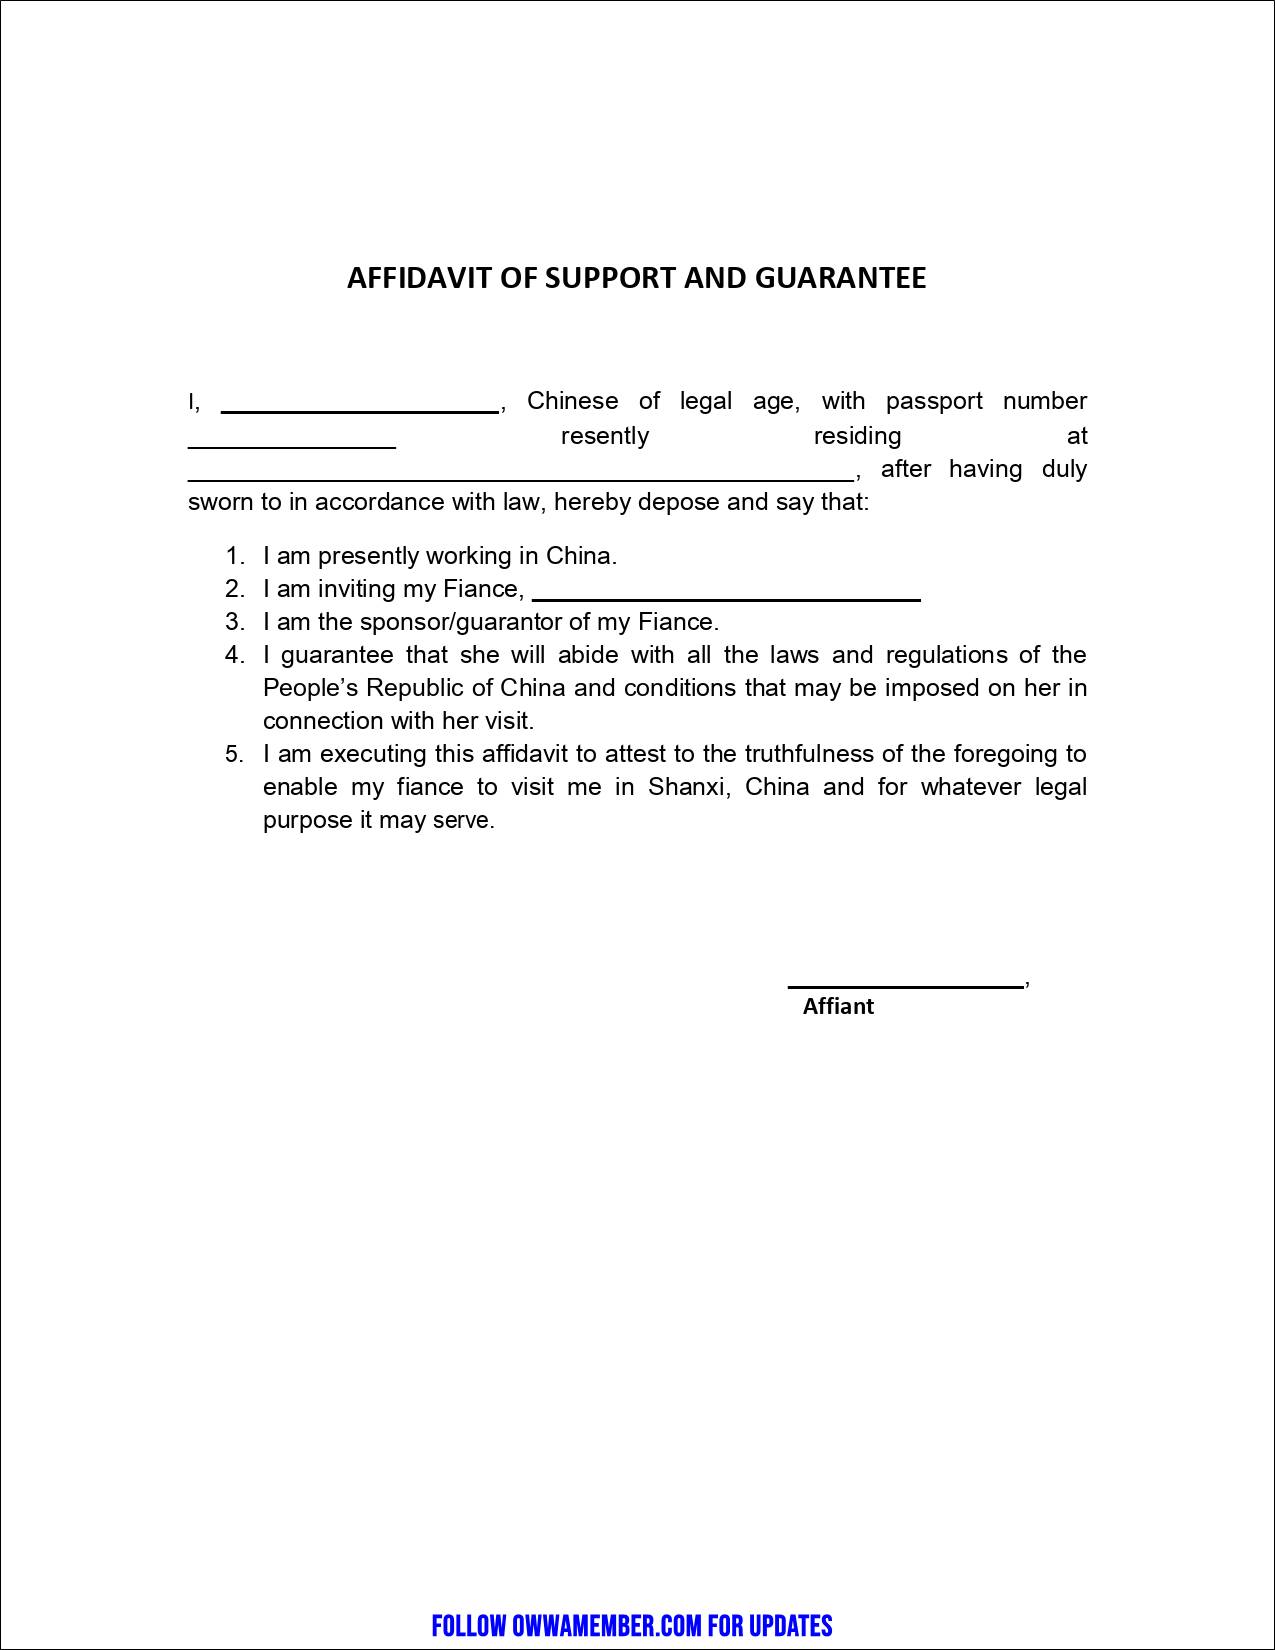 AFFIDAVIT-OF-SUPPORT-AND-GUARANTEE-samples-Beijing_page-0001